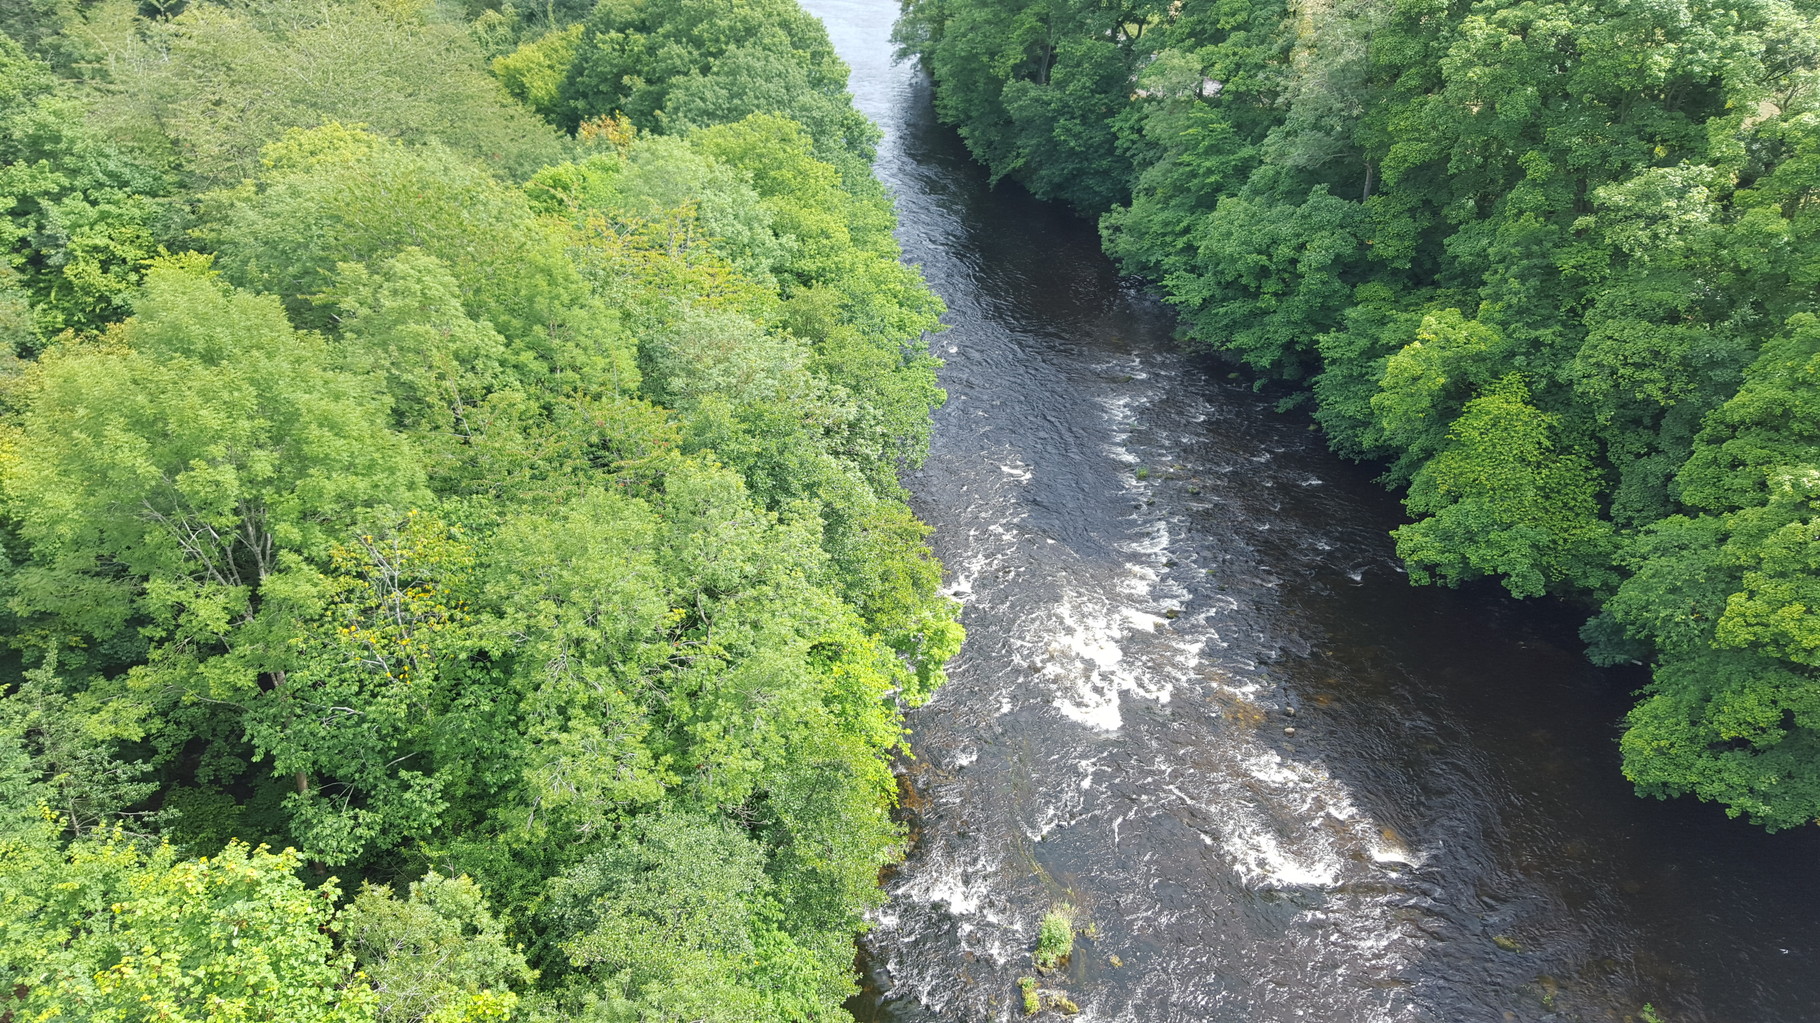 A view of the river from the viaduct